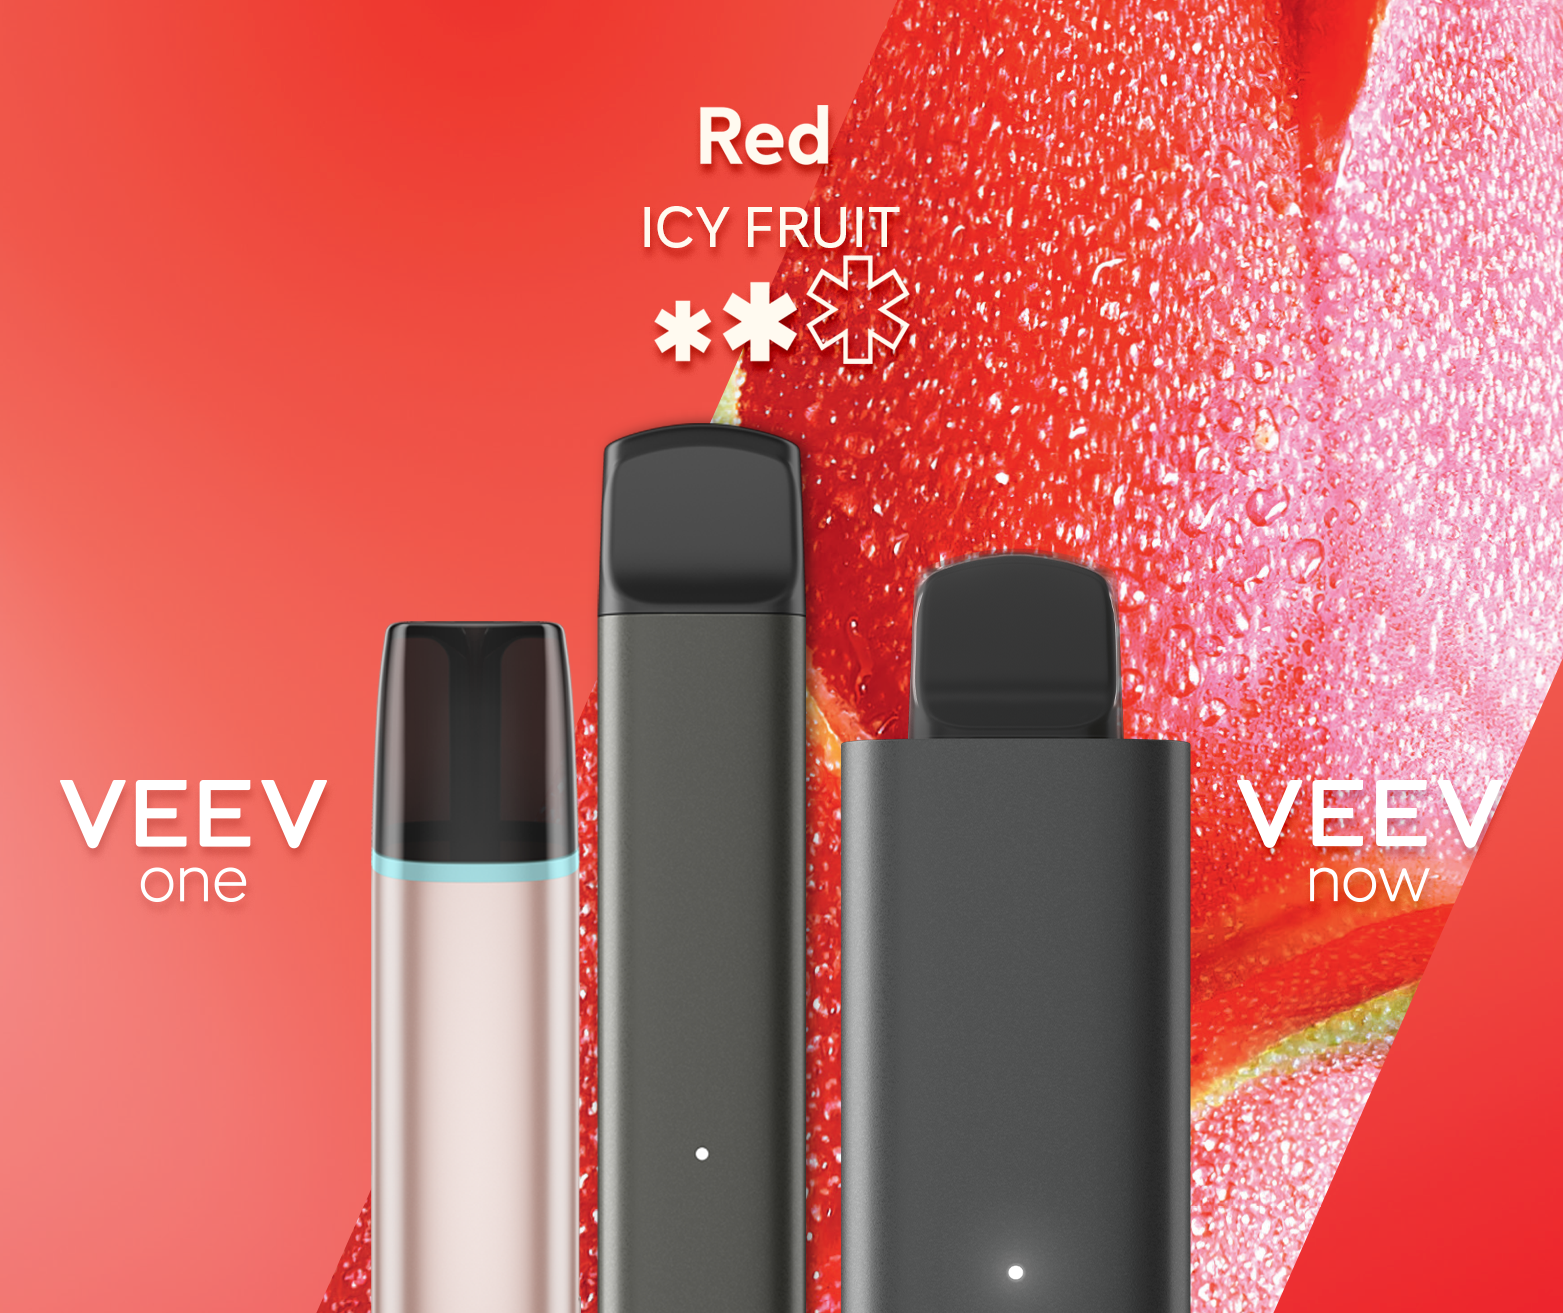 A VEEV ONE pod device and VEEV NOW disposable, both in Red flavour.